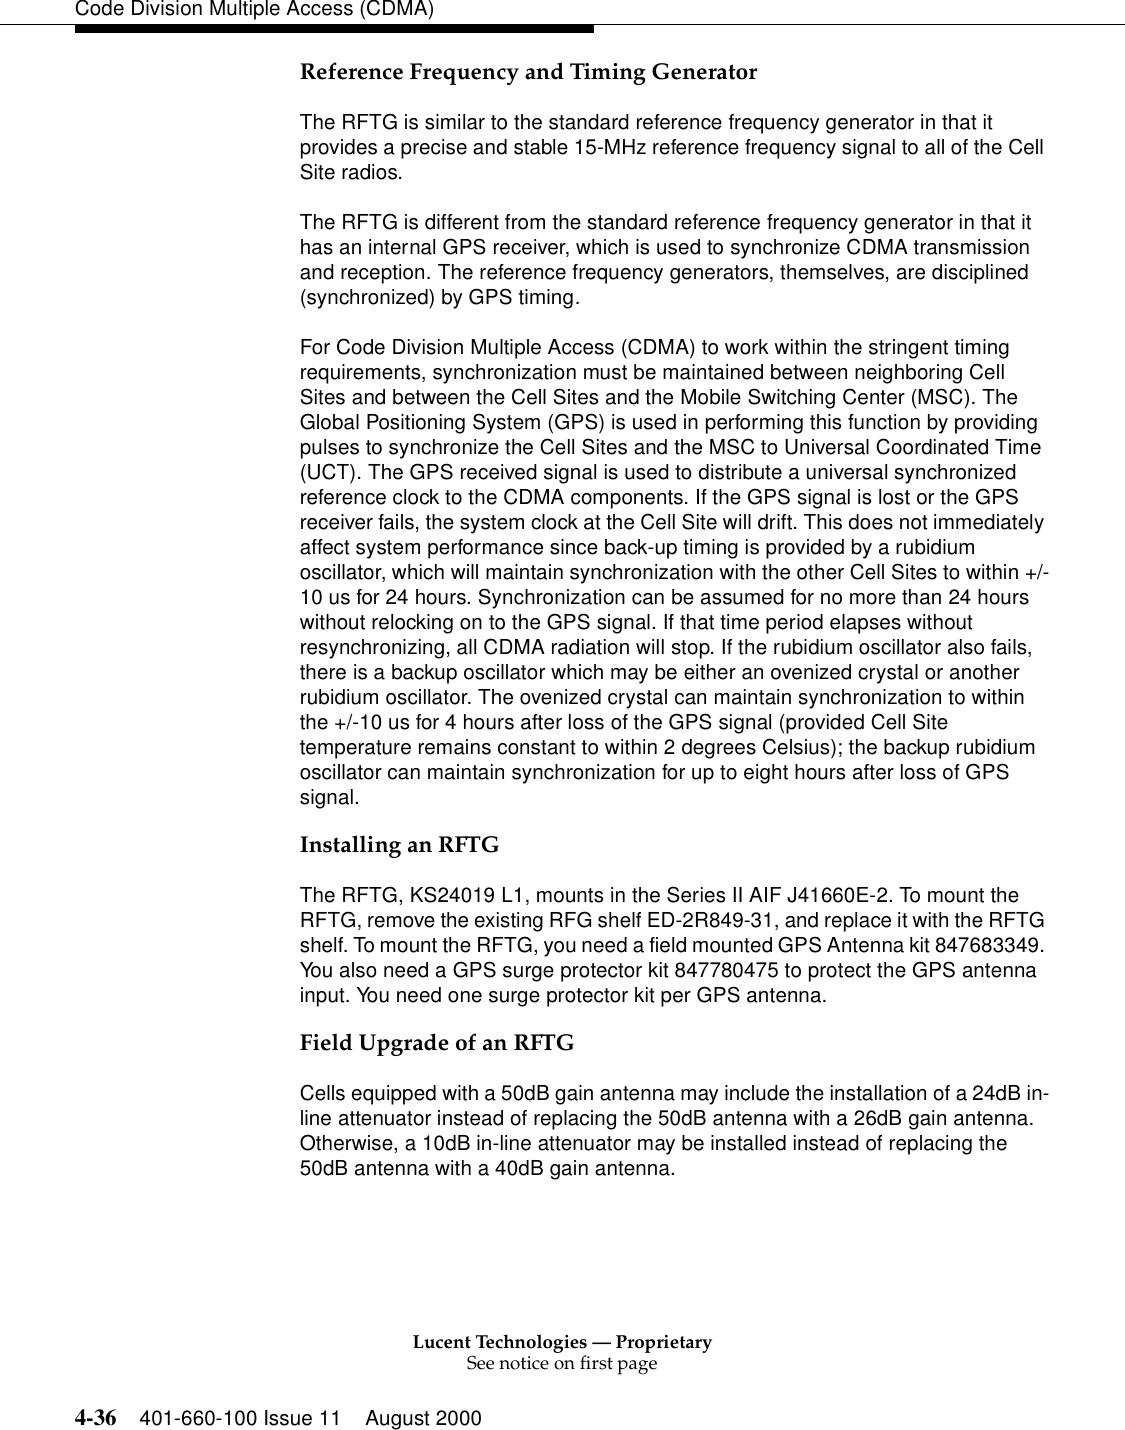 Lucent Technologies — ProprietarySee notice on first page4-36 401-660-100 Issue 11 August 2000Code Division Multiple Access (CDMA)Reference Frequency and Timing GeneratorThe RFTG is similar to the standard reference frequency generator in that it provides a precise and stable 15-MHz reference frequency signal to all of the Cell Site radios.The RFTG is different from the standard reference frequency generator in that it has an internal GPS receiver, which is used to synchronize CDMA transmission and reception. The reference frequency generators, themselves, are disciplined (synchronized) by GPS timing.For Code Division Multiple Access (CDMA) to work within the stringent timing requirements, synchronization must be maintained between neighboring Cell Sites and between the Cell Sites and the Mobile Switching Center (MSC). The Global Positioning System (GPS) is used in performing this function by providing pulses to synchronize the Cell Sites and the MSC to Universal Coordinated Time (UCT). The GPS received signal is used to distribute a universal synchronized reference clock to the CDMA components. If the GPS signal is lost or the GPS receiver fails, the system clock at the Cell Site will drift. This does not immediately affect system performance since back-up timing is provided by a rubidium oscillator, which will maintain synchronization with the other Cell Sites to within +/-10 us for 24 hours. Synchronization can be assumed for no more than 24 hours without relocking on to the GPS signal. If that time period elapses without resynchronizing, all CDMA radiation will stop. If the rubidium oscillator also fails, there is a backup oscillator which may be either an ovenized crystal or another rubidium oscillator. The ovenized crystal can maintain synchronization to within the +/-10 us for 4 hours after loss of the GPS signal (provided Cell Site temperature remains constant to within 2 degrees Celsius); the backup rubidium oscillator can maintain synchronization for up to eight hours after loss of GPS signal. Installing an RFTGThe RFTG, KS24019 L1, mounts in the Series II AIF J41660E-2. To mount the RFTG, remove the existing RFG shelf ED-2R849-31, and replace it with the RFTG shelf. To mount the RFTG, you need a field mounted GPS Antenna kit 847683349. You also need a GPS surge protector kit 847780475 to protect the GPS antenna input. You need one surge protector kit per GPS antenna.Field Upgrade of an RFTGCells equipped with a 50dB gain antenna may include the installation of a 24dB in-line attenuator instead of replacing the 50dB antenna with a 26dB gain antenna. Otherwise, a 10dB in-line attenuator may be installed instead of replacing the 50dB antenna with a 40dB gain antenna. 